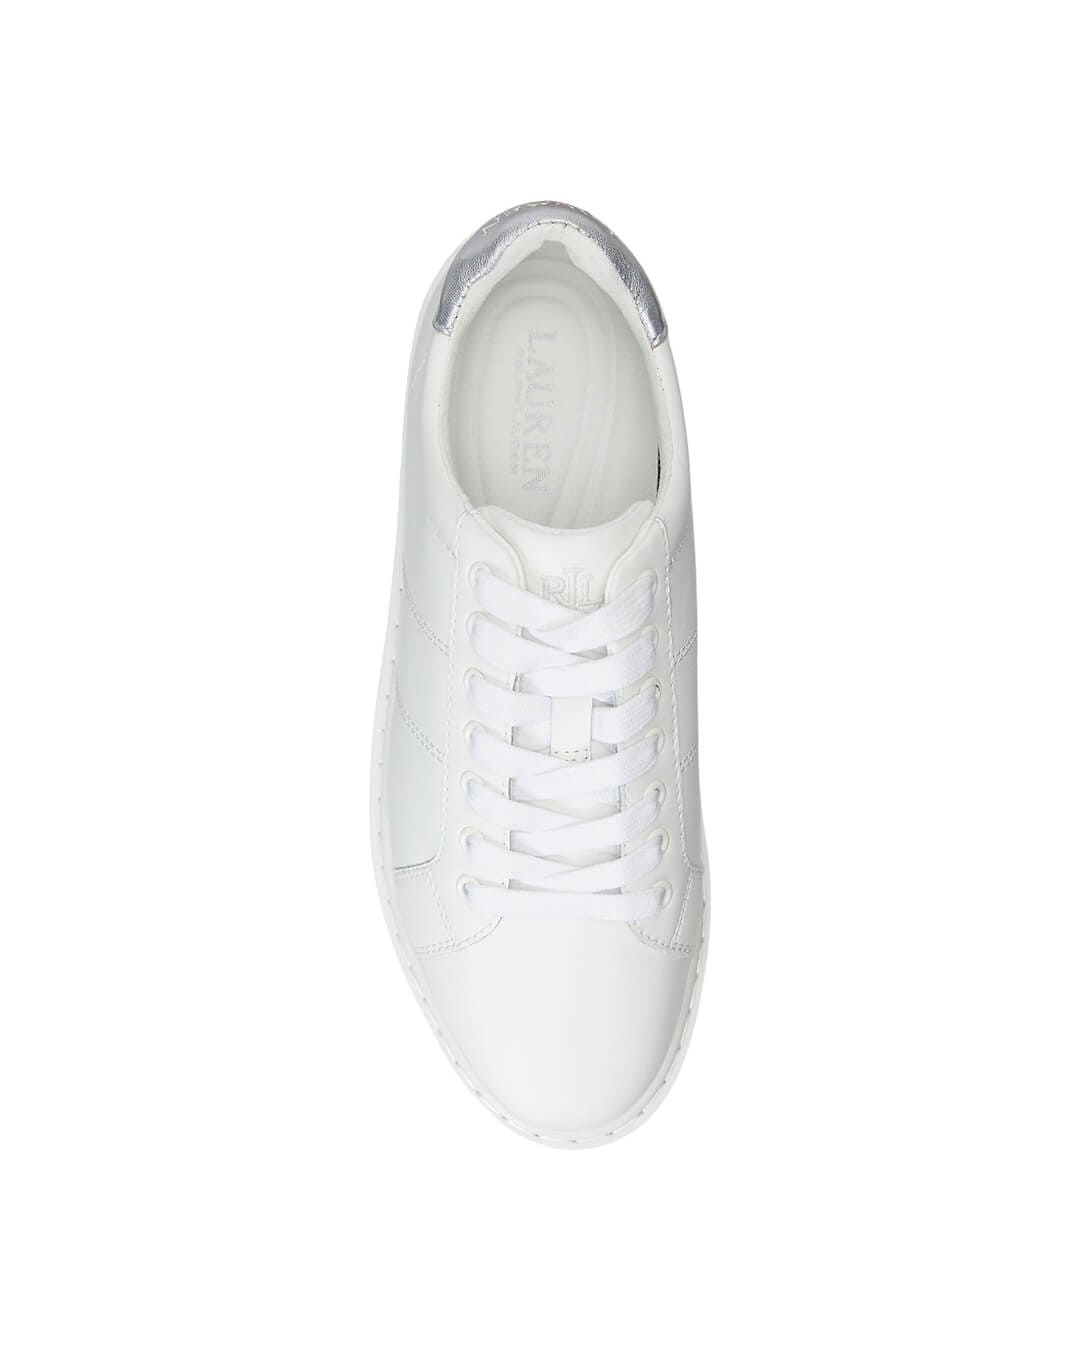 Lauren By Ralph Lauren Shoes Lauren By Ralph Lauren Angeline Silver And White Sneakers